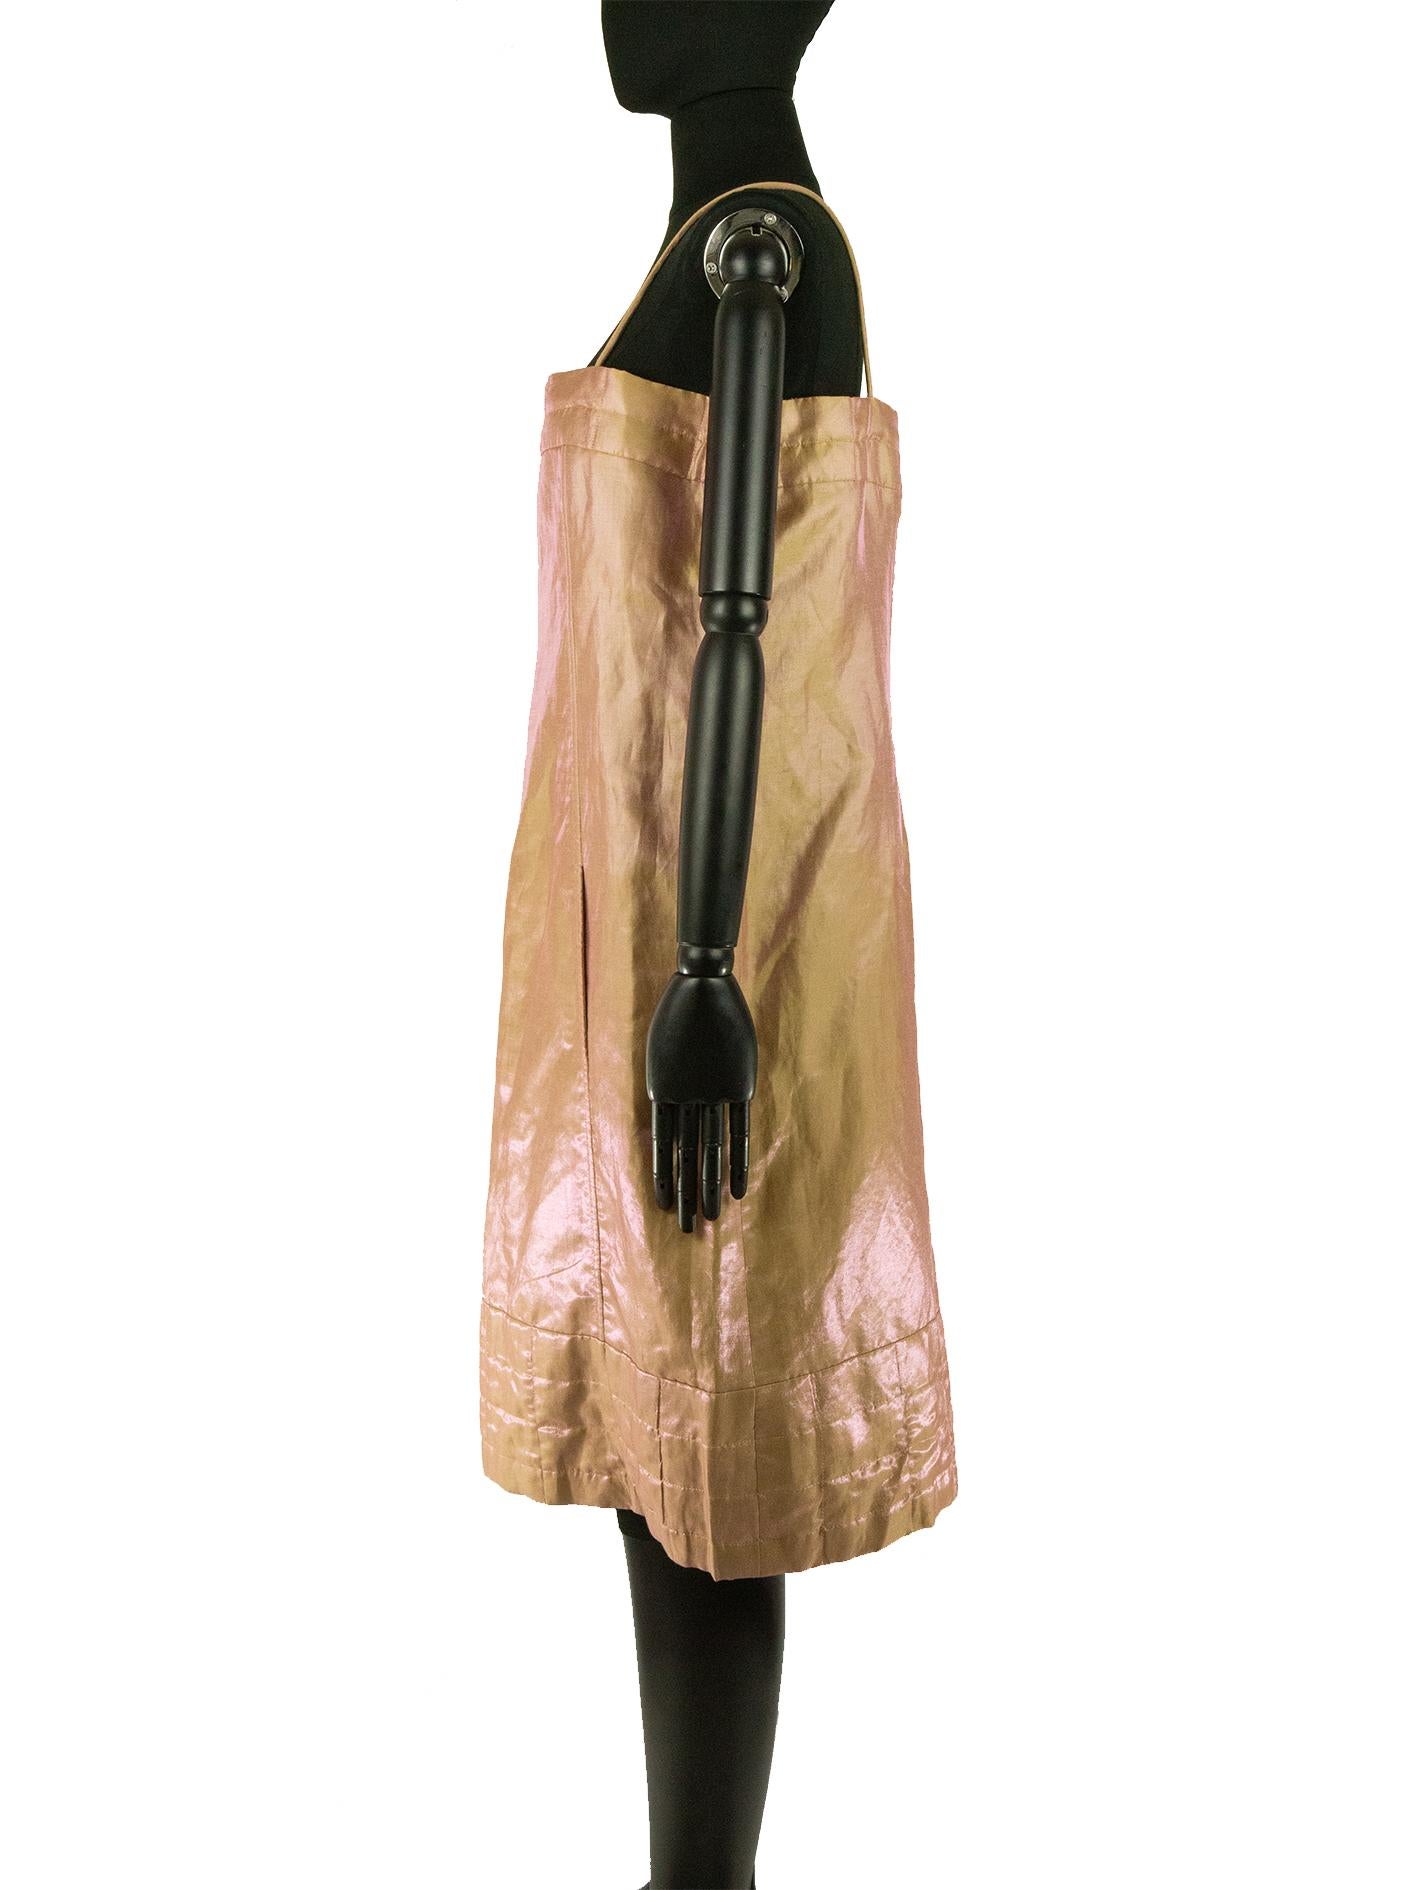 1999 Chanel Boutique Peach Sundress In Good Condition For Sale In London, GB